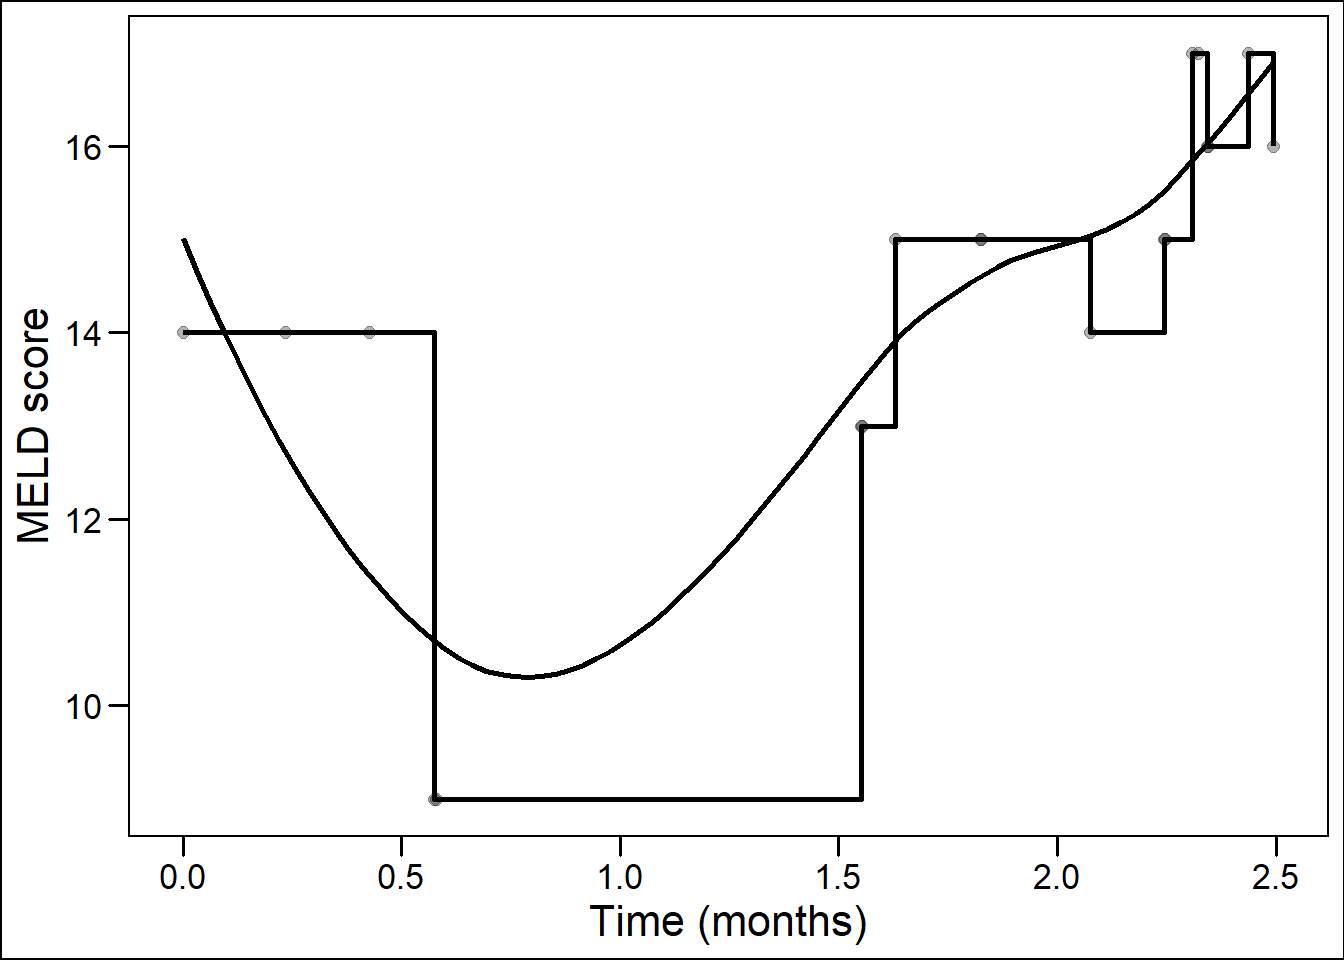 Staircase versus smooth representation of disease over time.